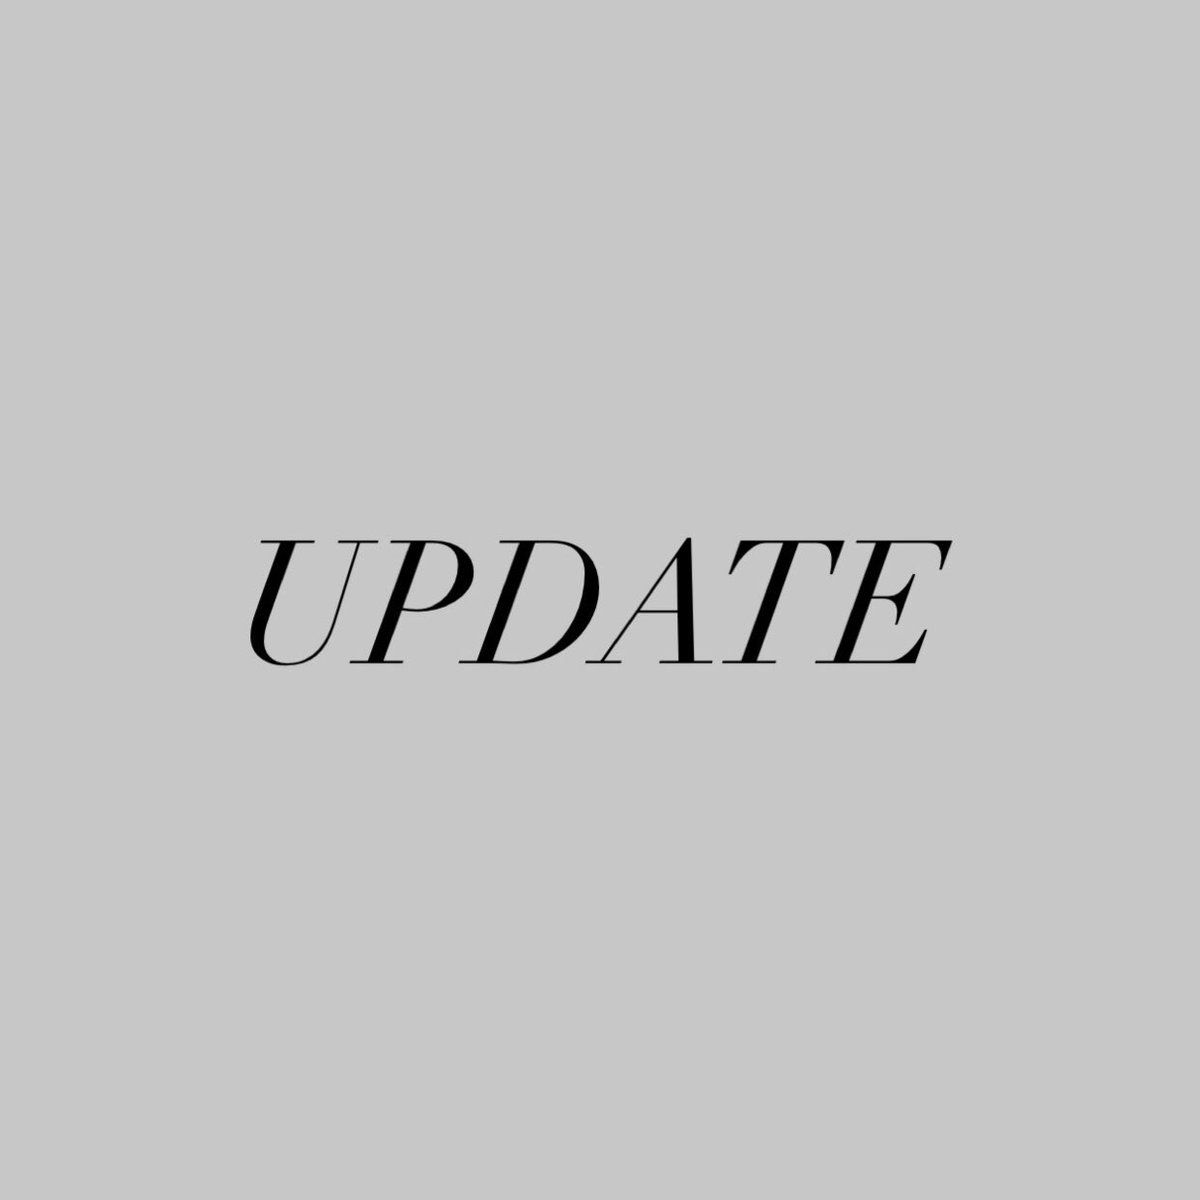 Please find the most recent update on our service here: inkwellarts.org.uk